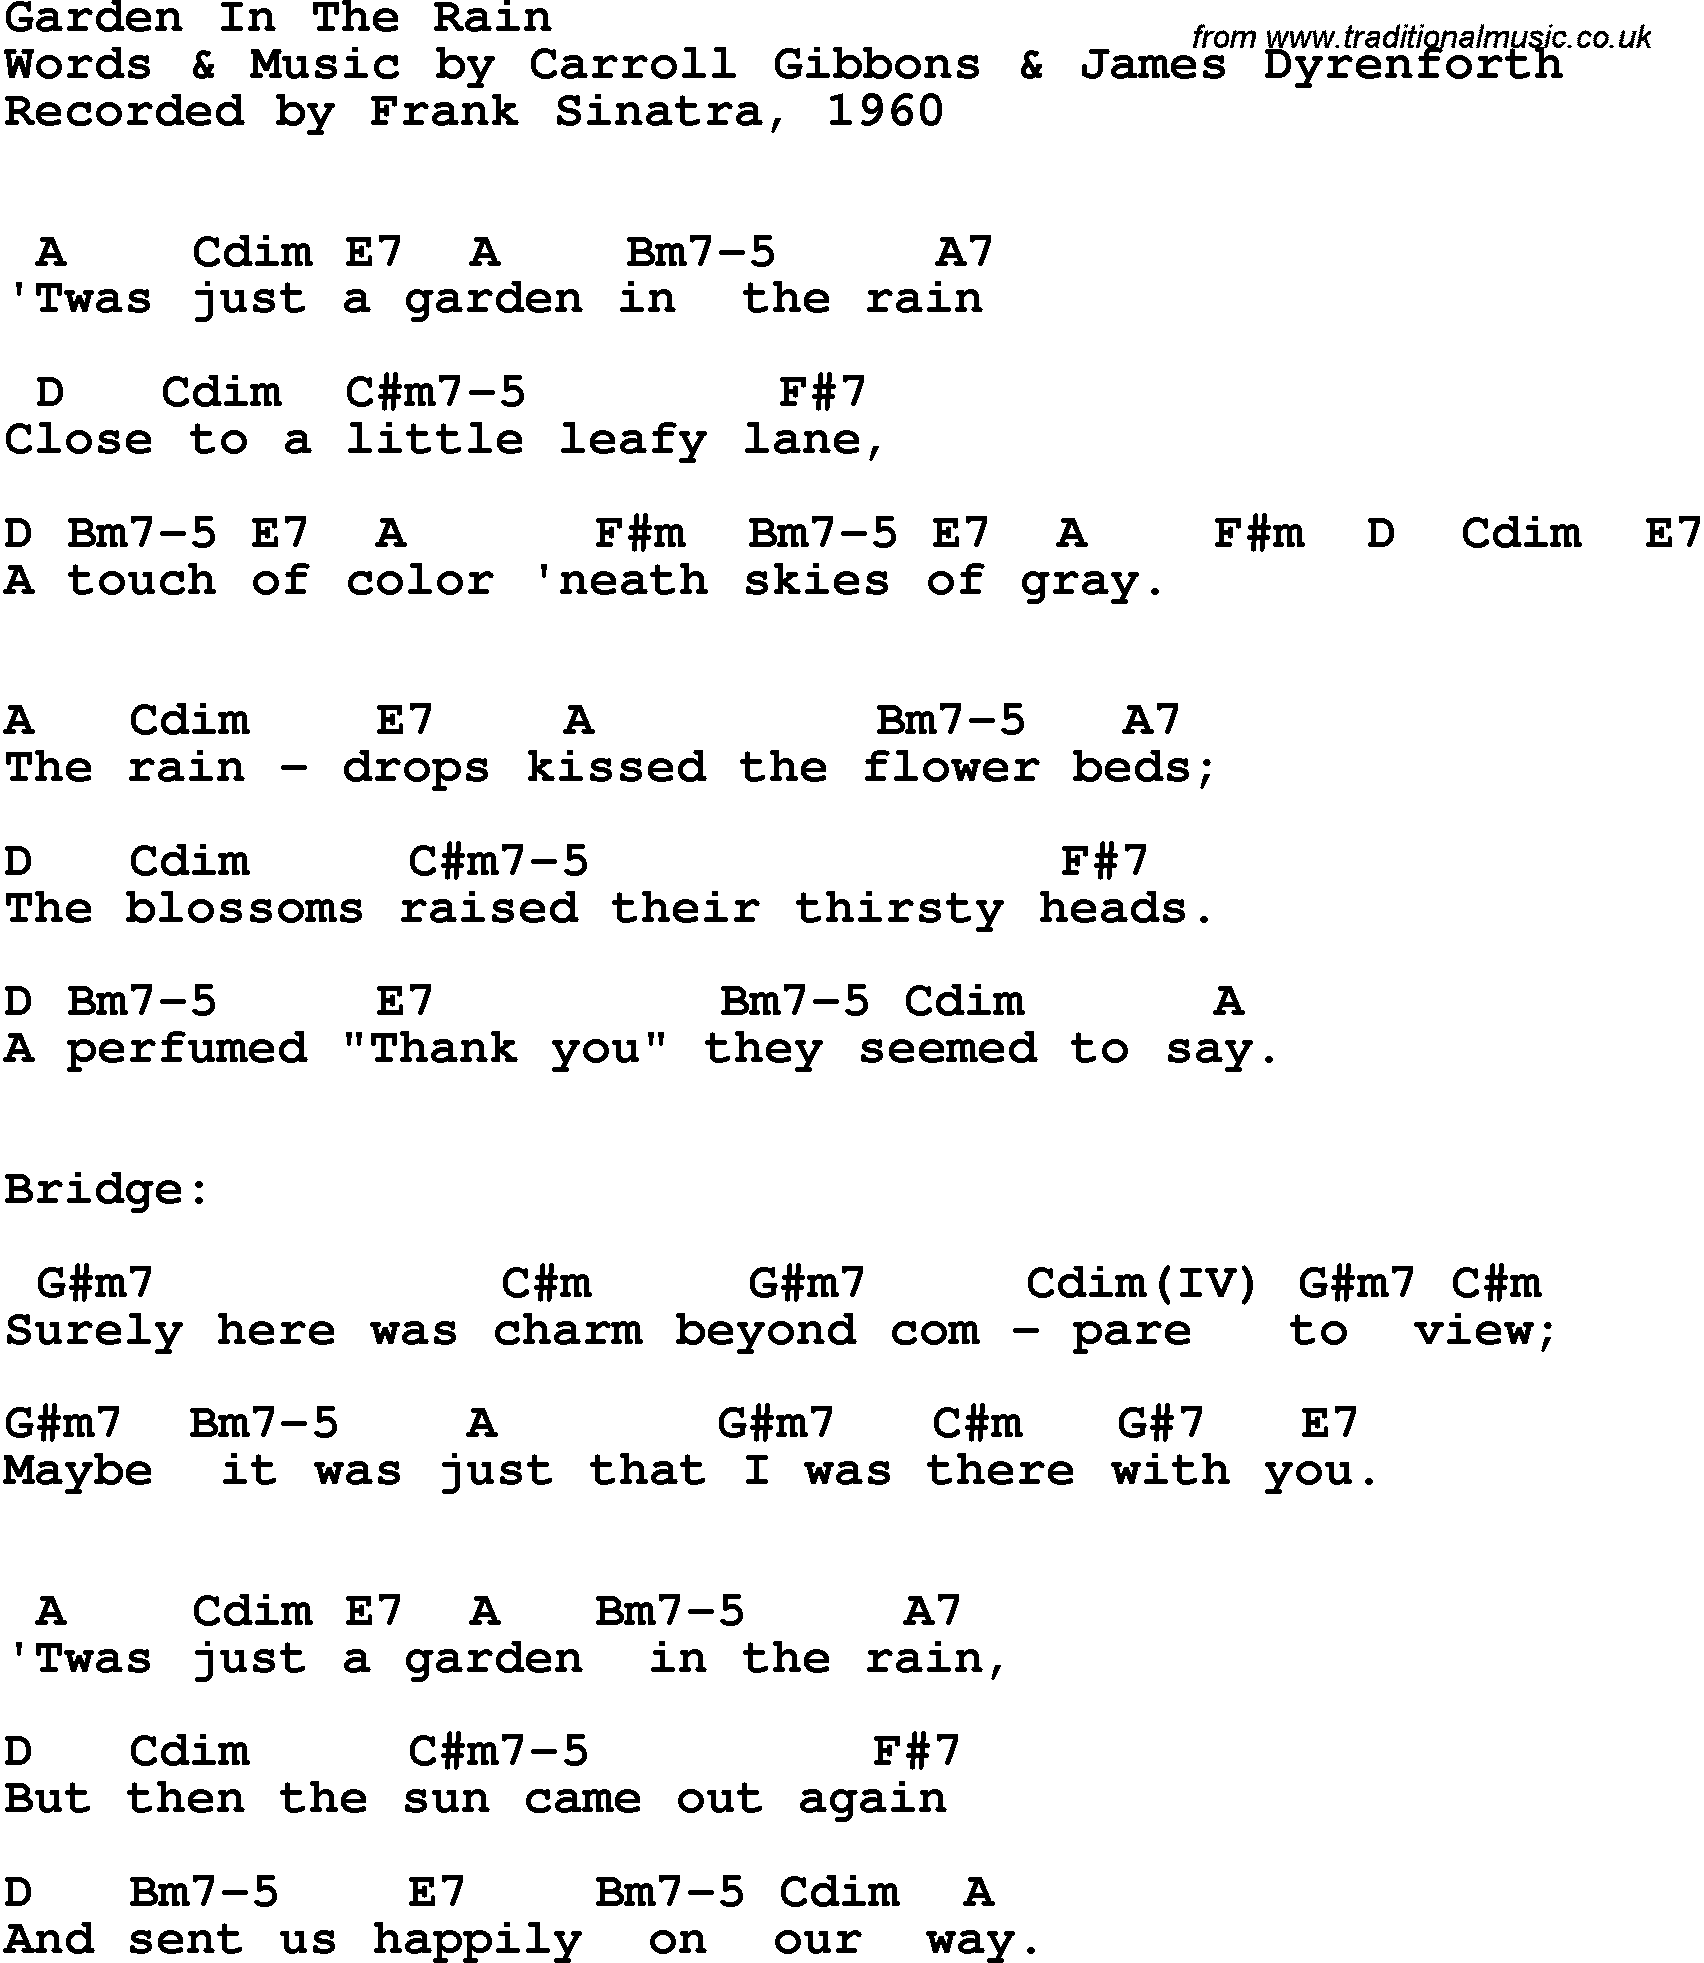 song lyrics with guitar chords for garden in the rain - frank